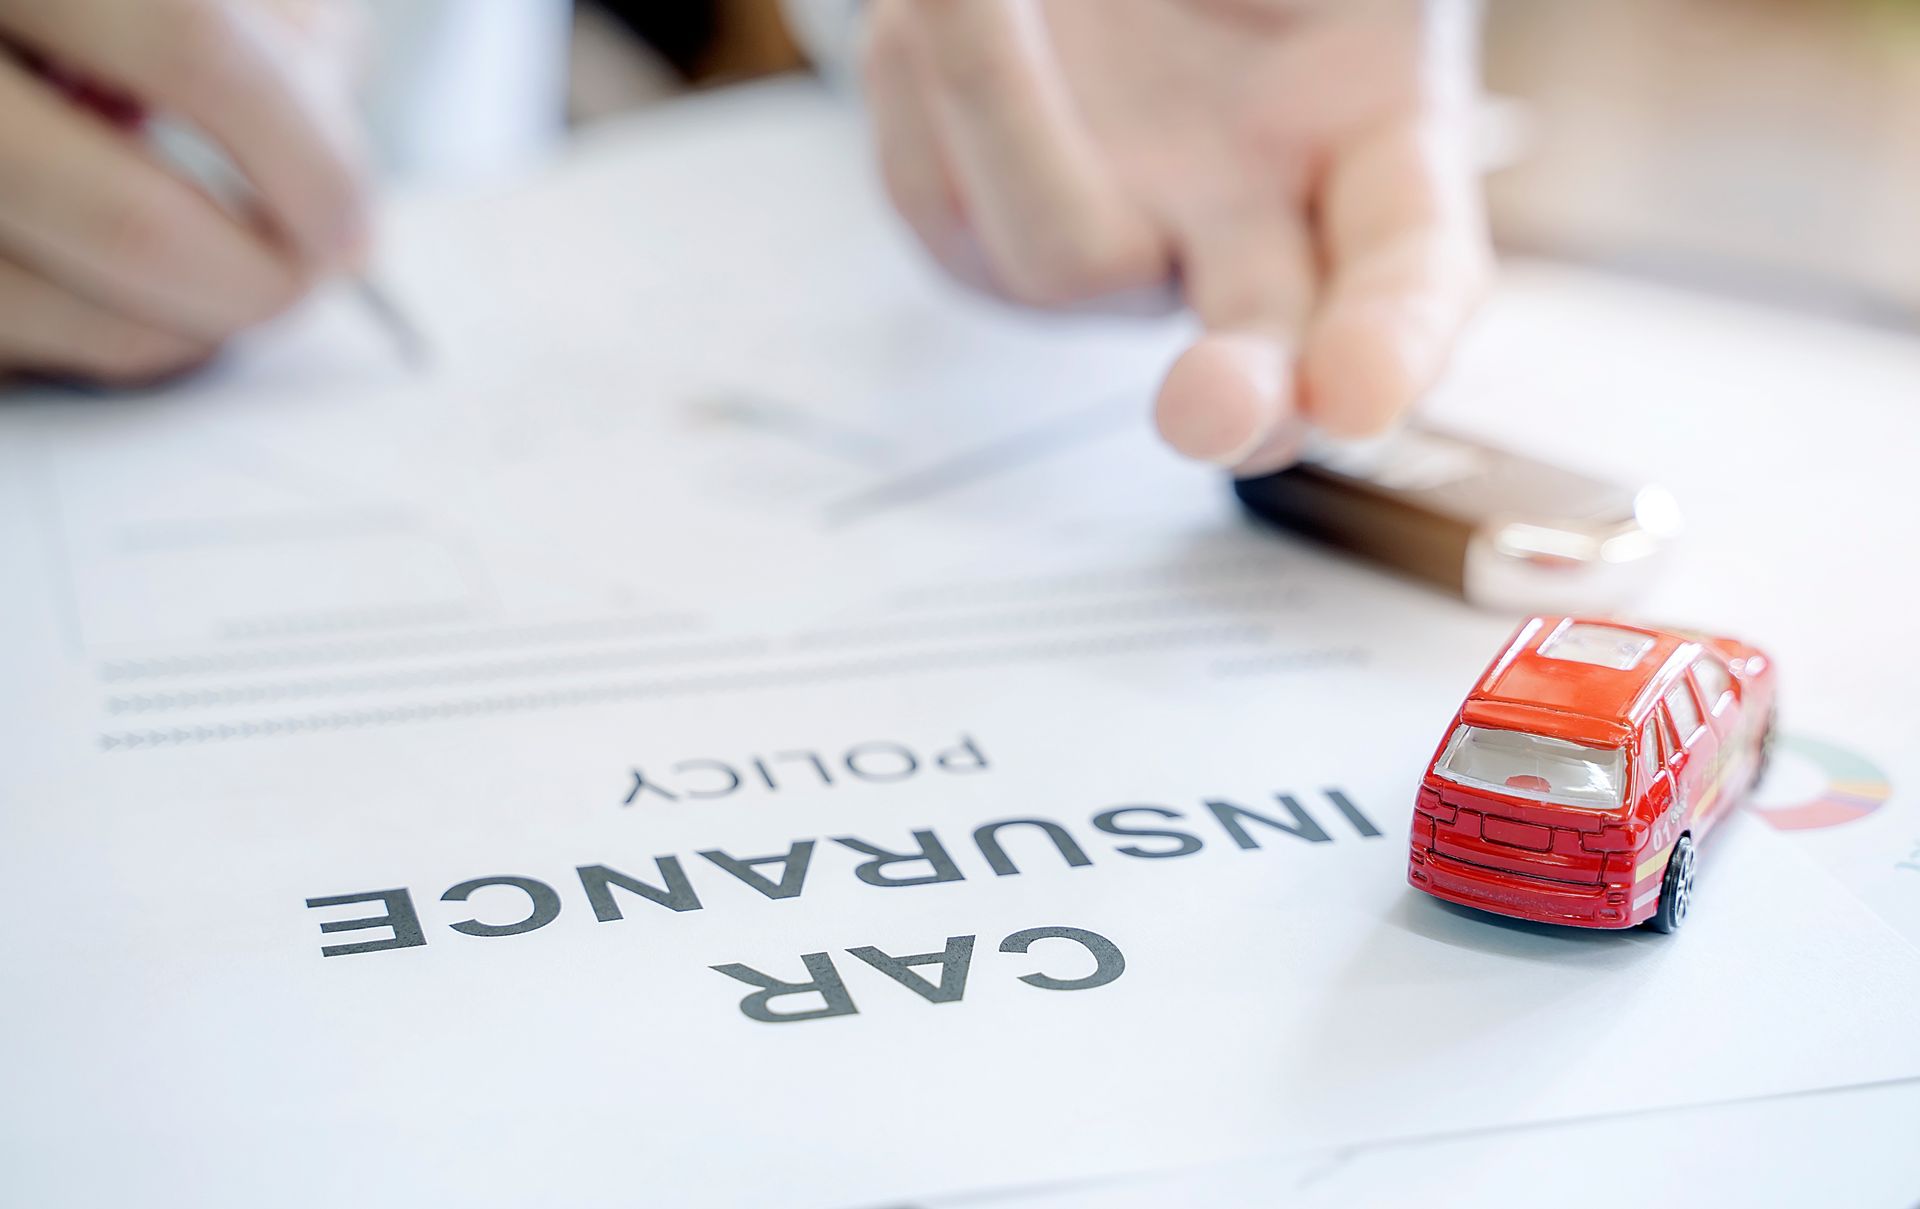 car insurance policies after an accident